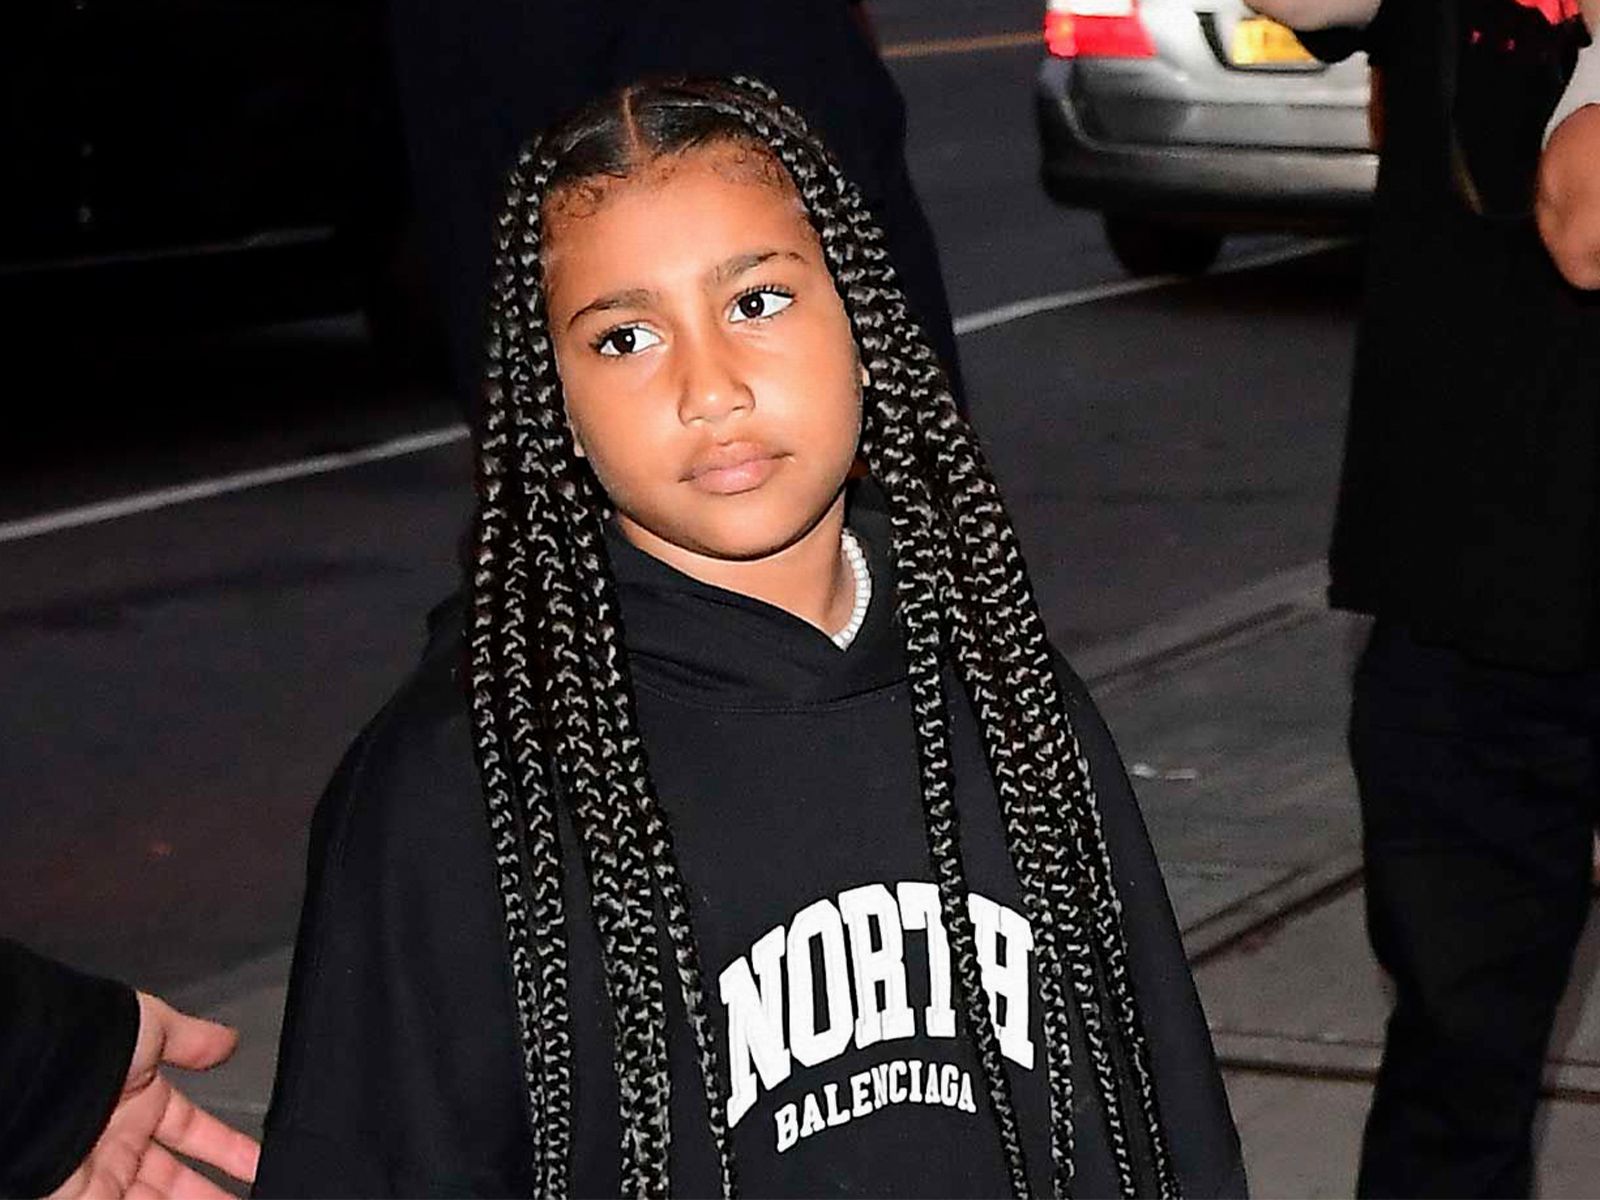 North West could be YEEZY’s next collaborator